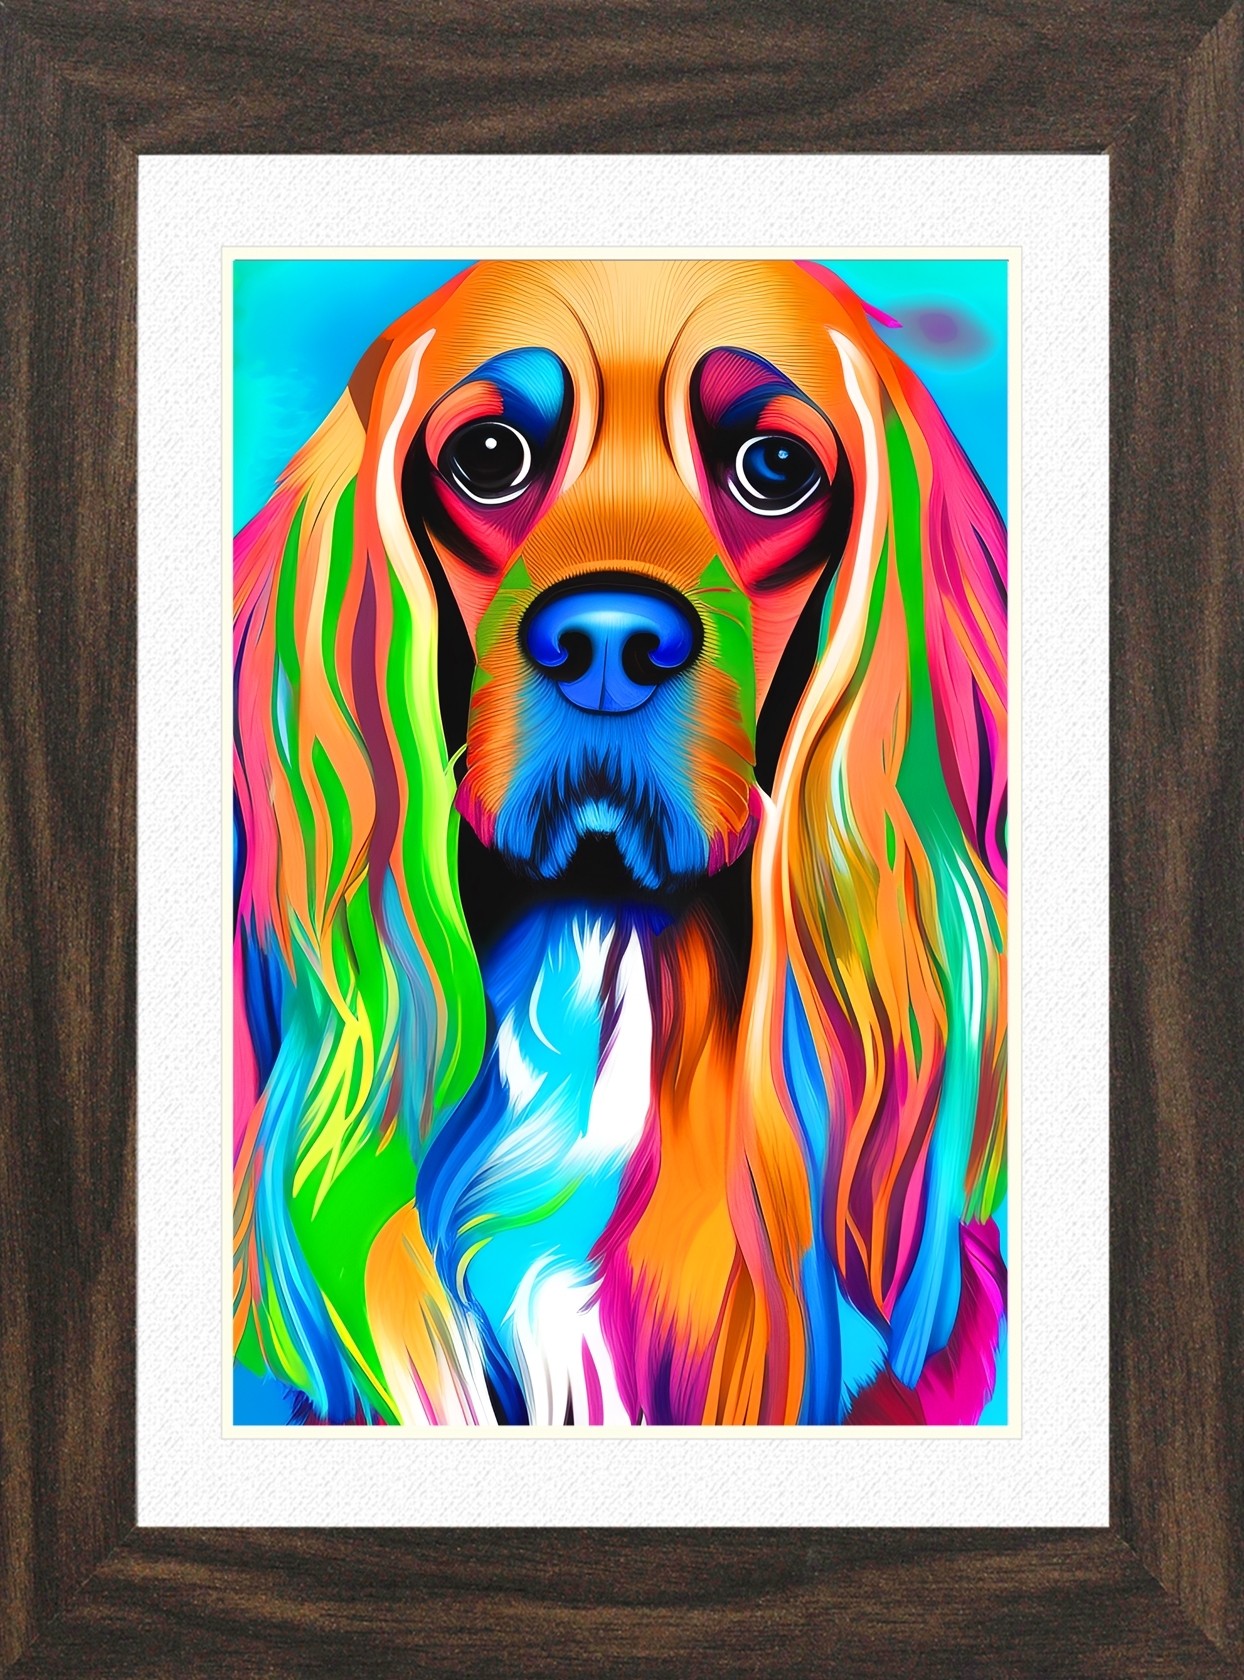 Cocker Spaniel Dog Picture Framed Colourful Abstract Art (A4 Walnut Frame)